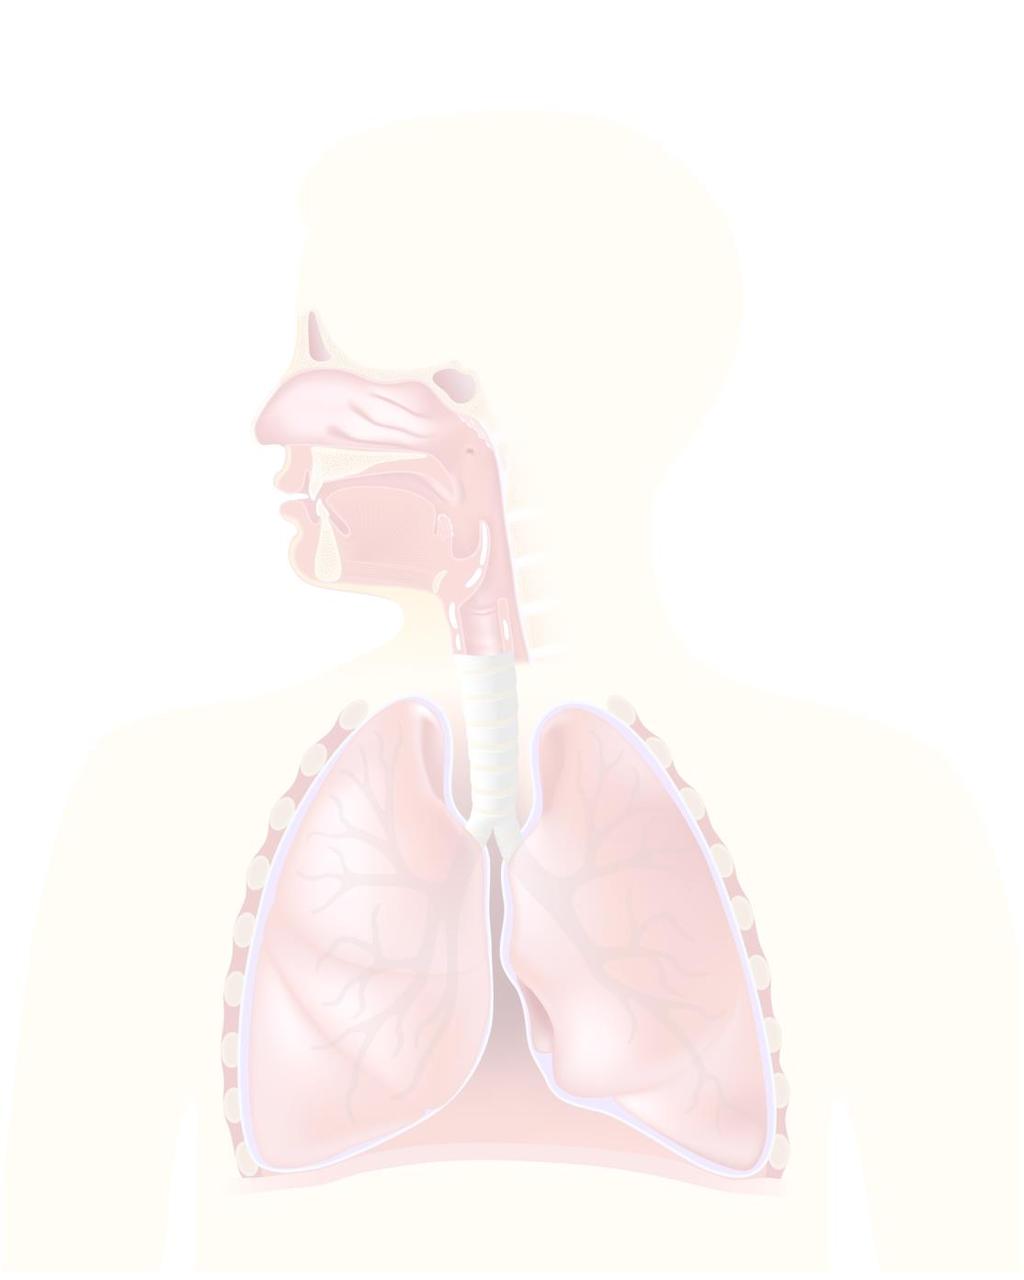 BREATH FUNCTION & SEQUENCING, CARDIOVASCULAR, RESPIRATORY SYSTEMS (M3) 1. Experience and understand the functional anatomy and pathology of different breathing patterns. For example: a.